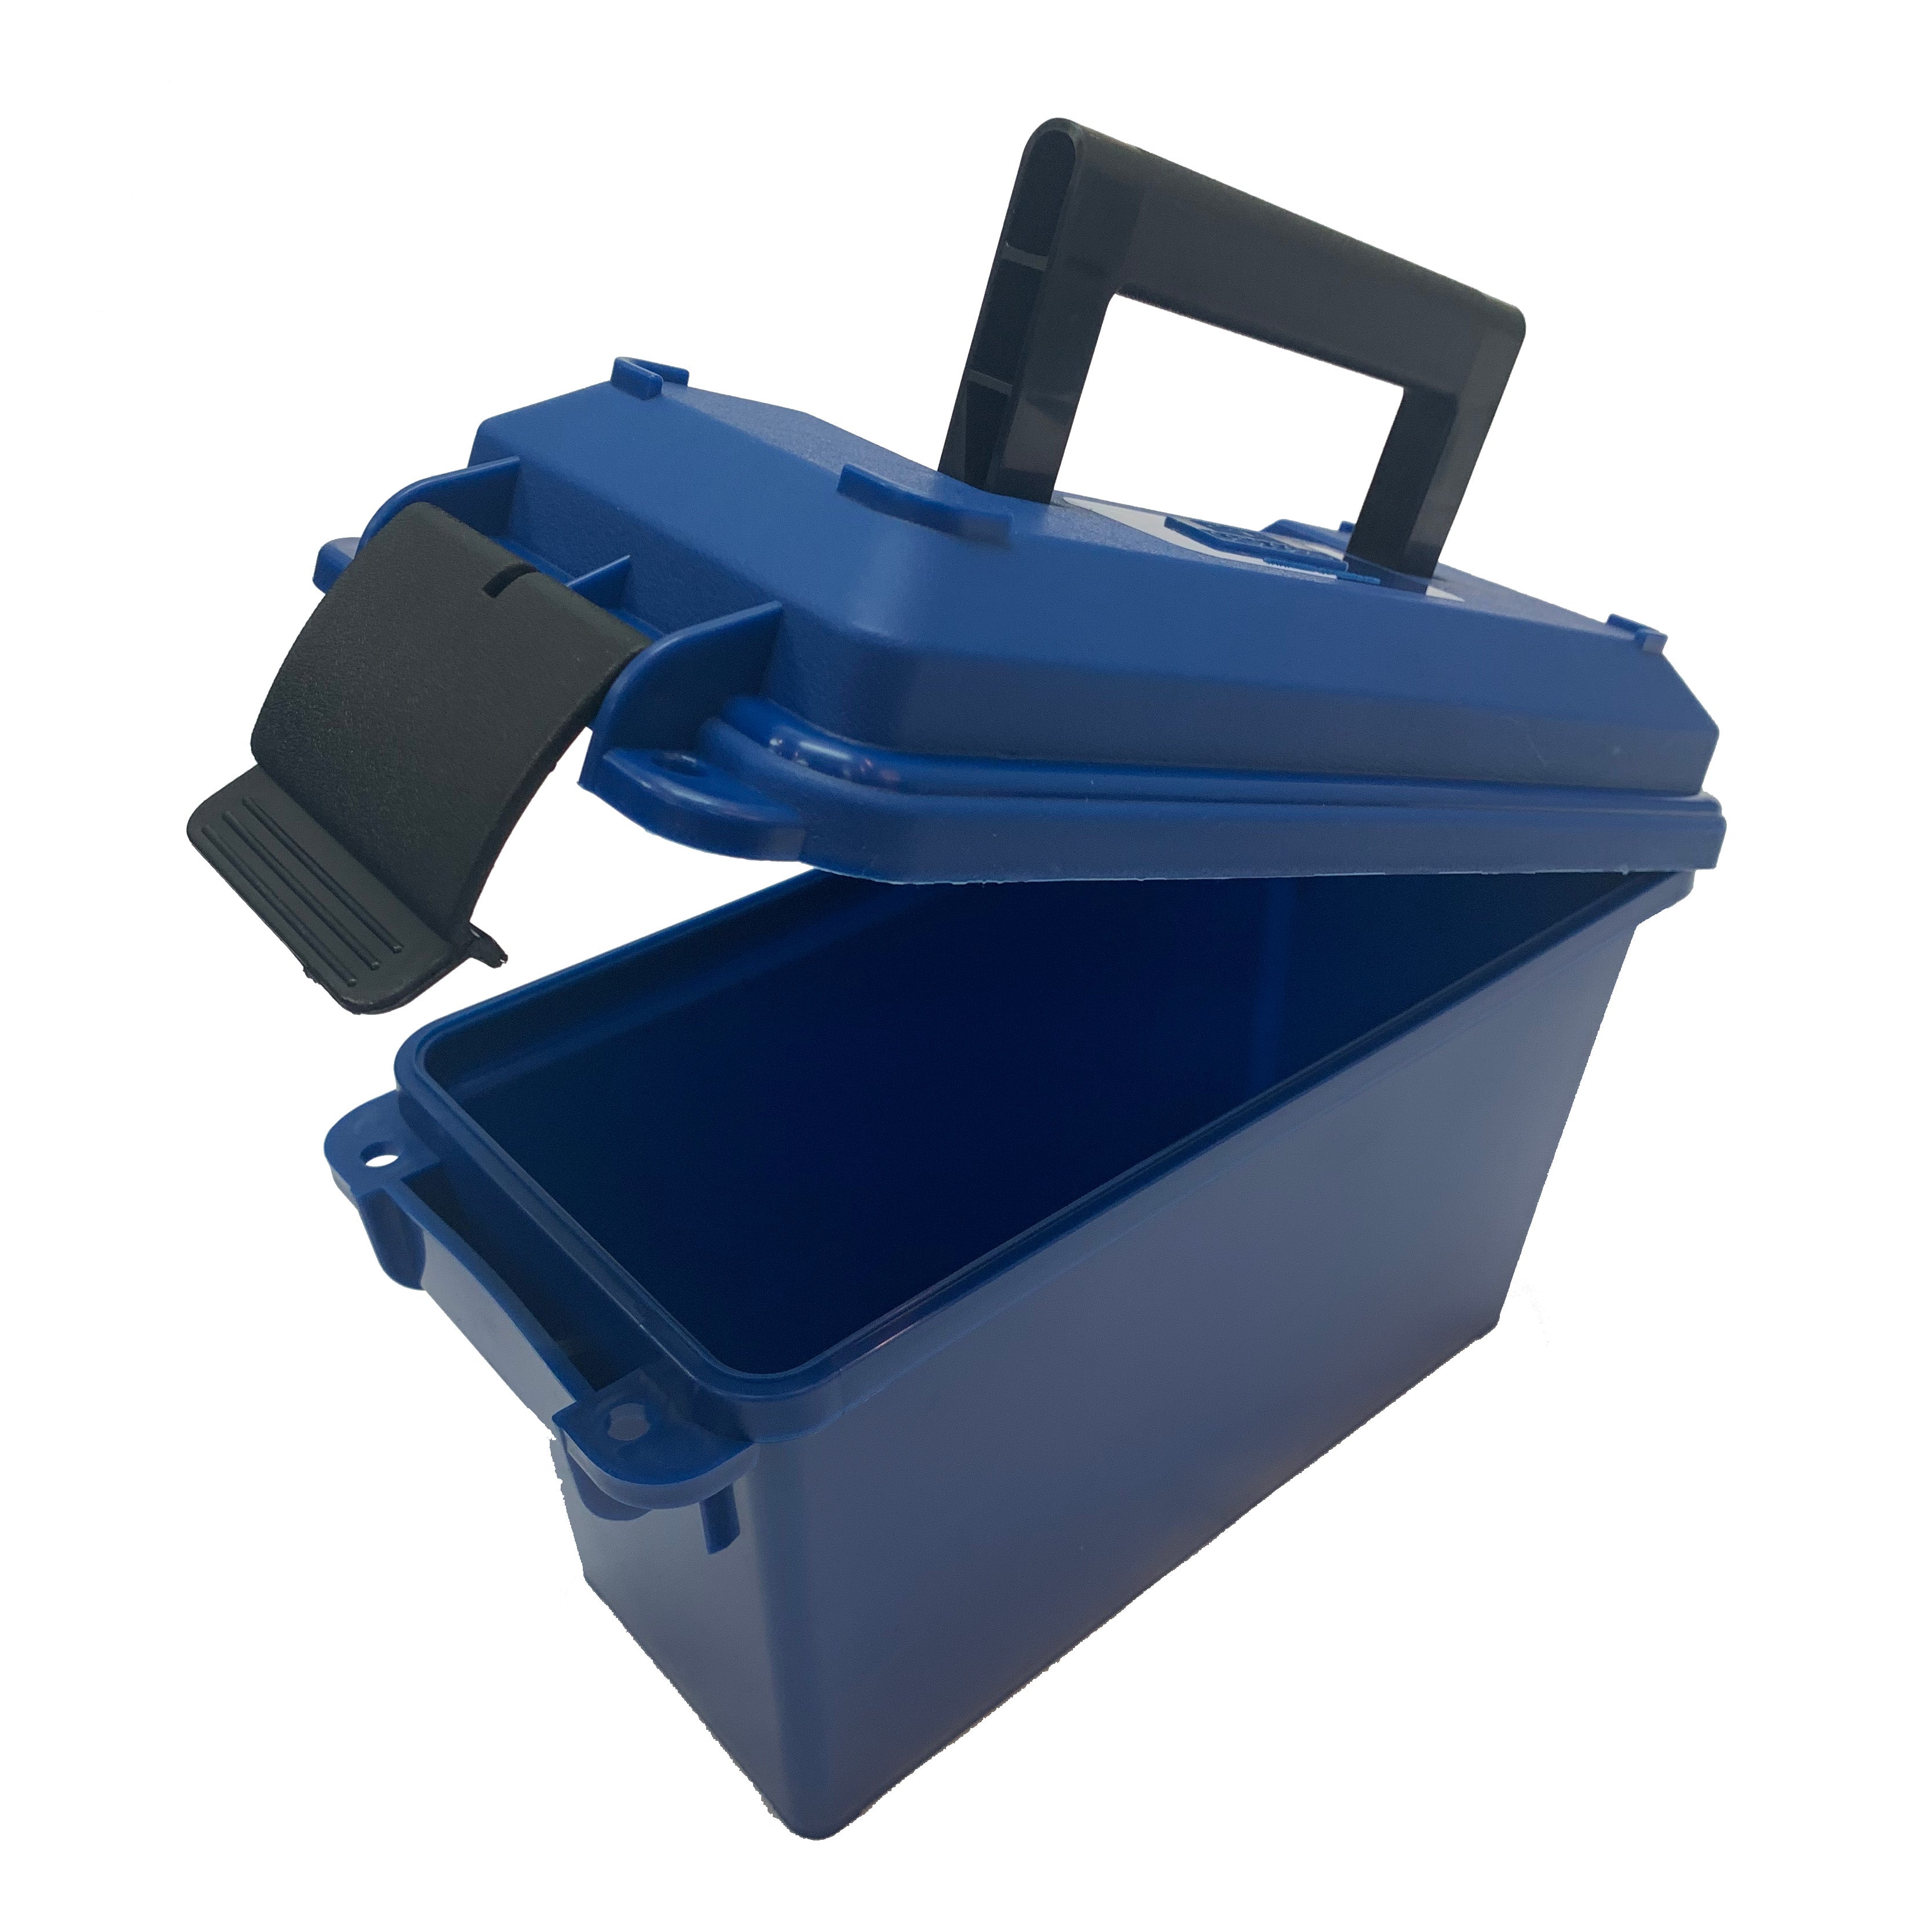  Ironton 11 5/8in. Plastic Ammo Box - 11 5/8in.W x 5 1/8in.D x 7  1/8in.H : Ironton: Sports & Outdoors